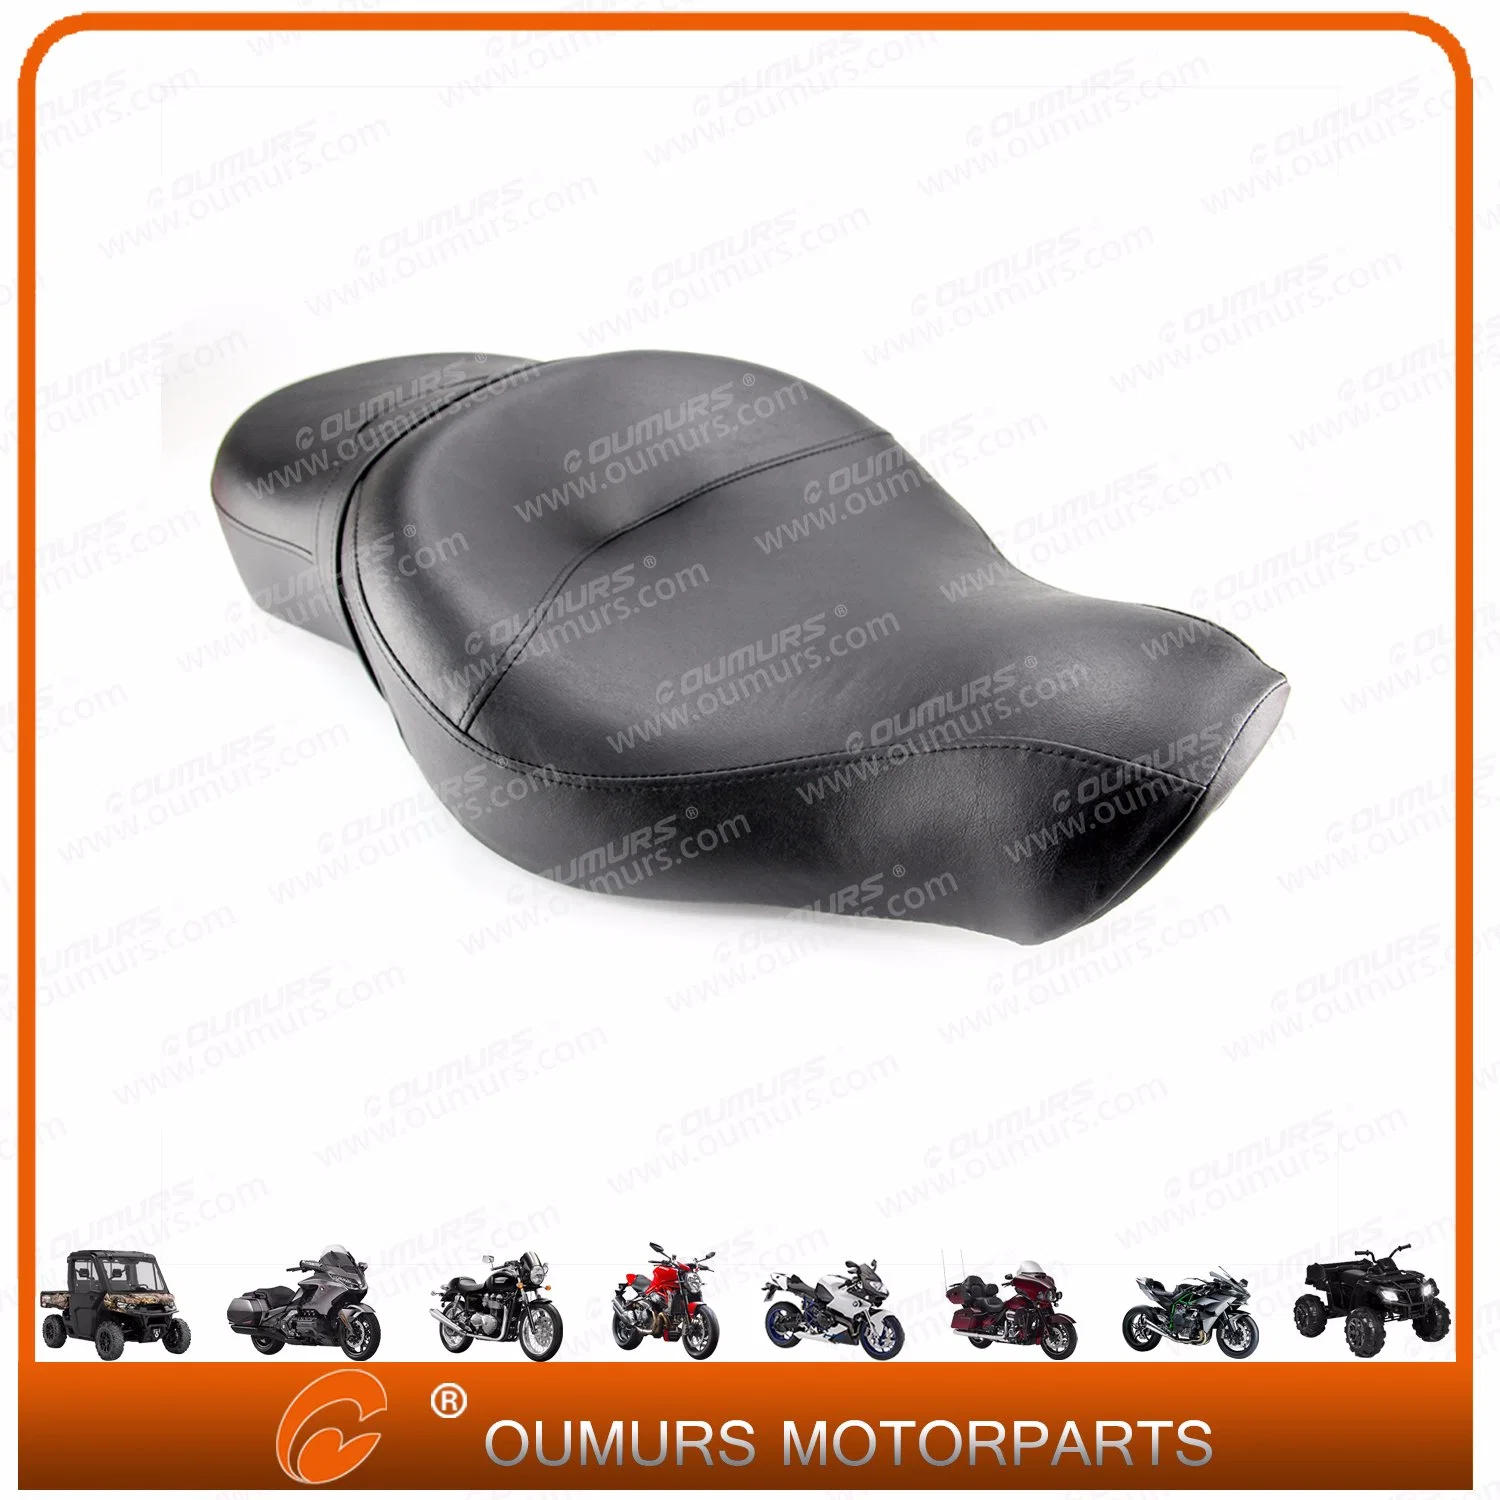 Motorcycle Accessory Rear Pssenger Seat for Harley Davidson